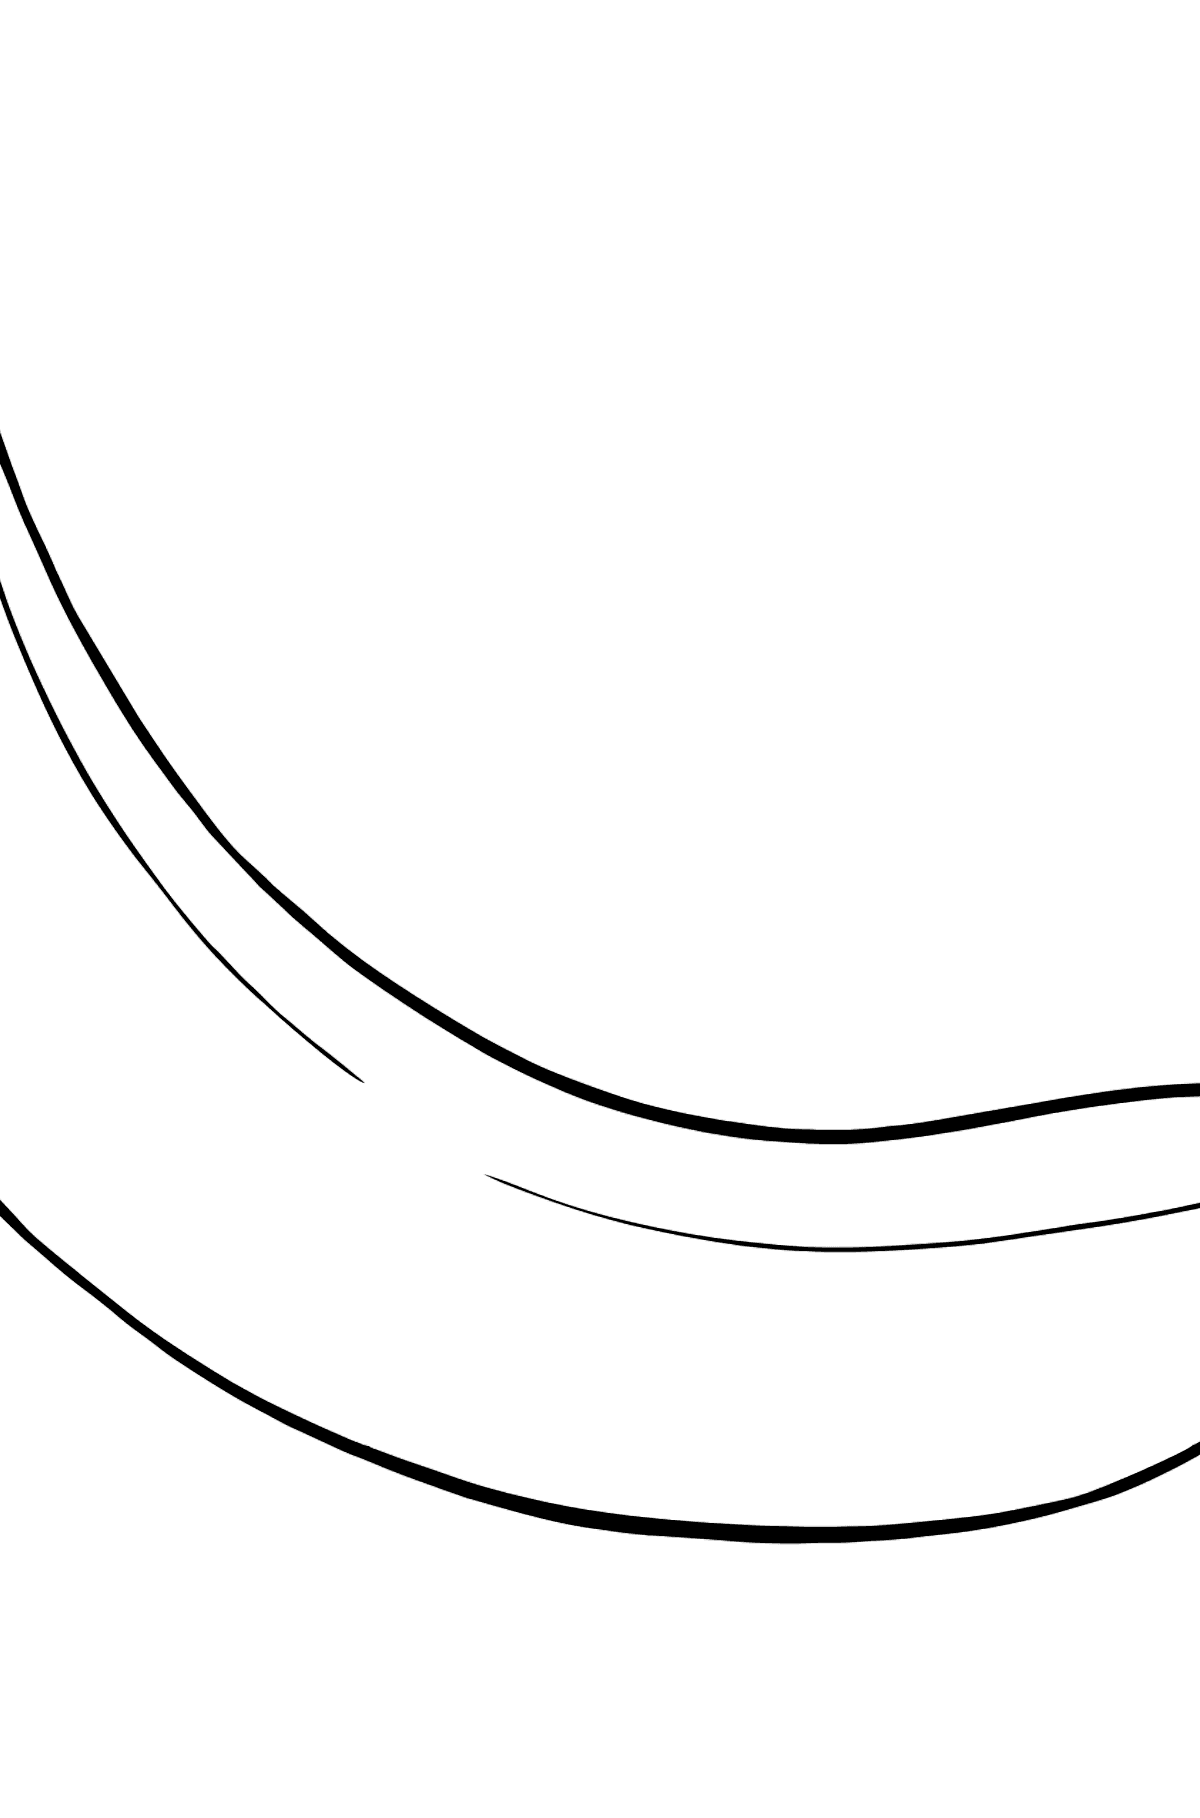 Banana coloring page - Coloring Pages for Kids